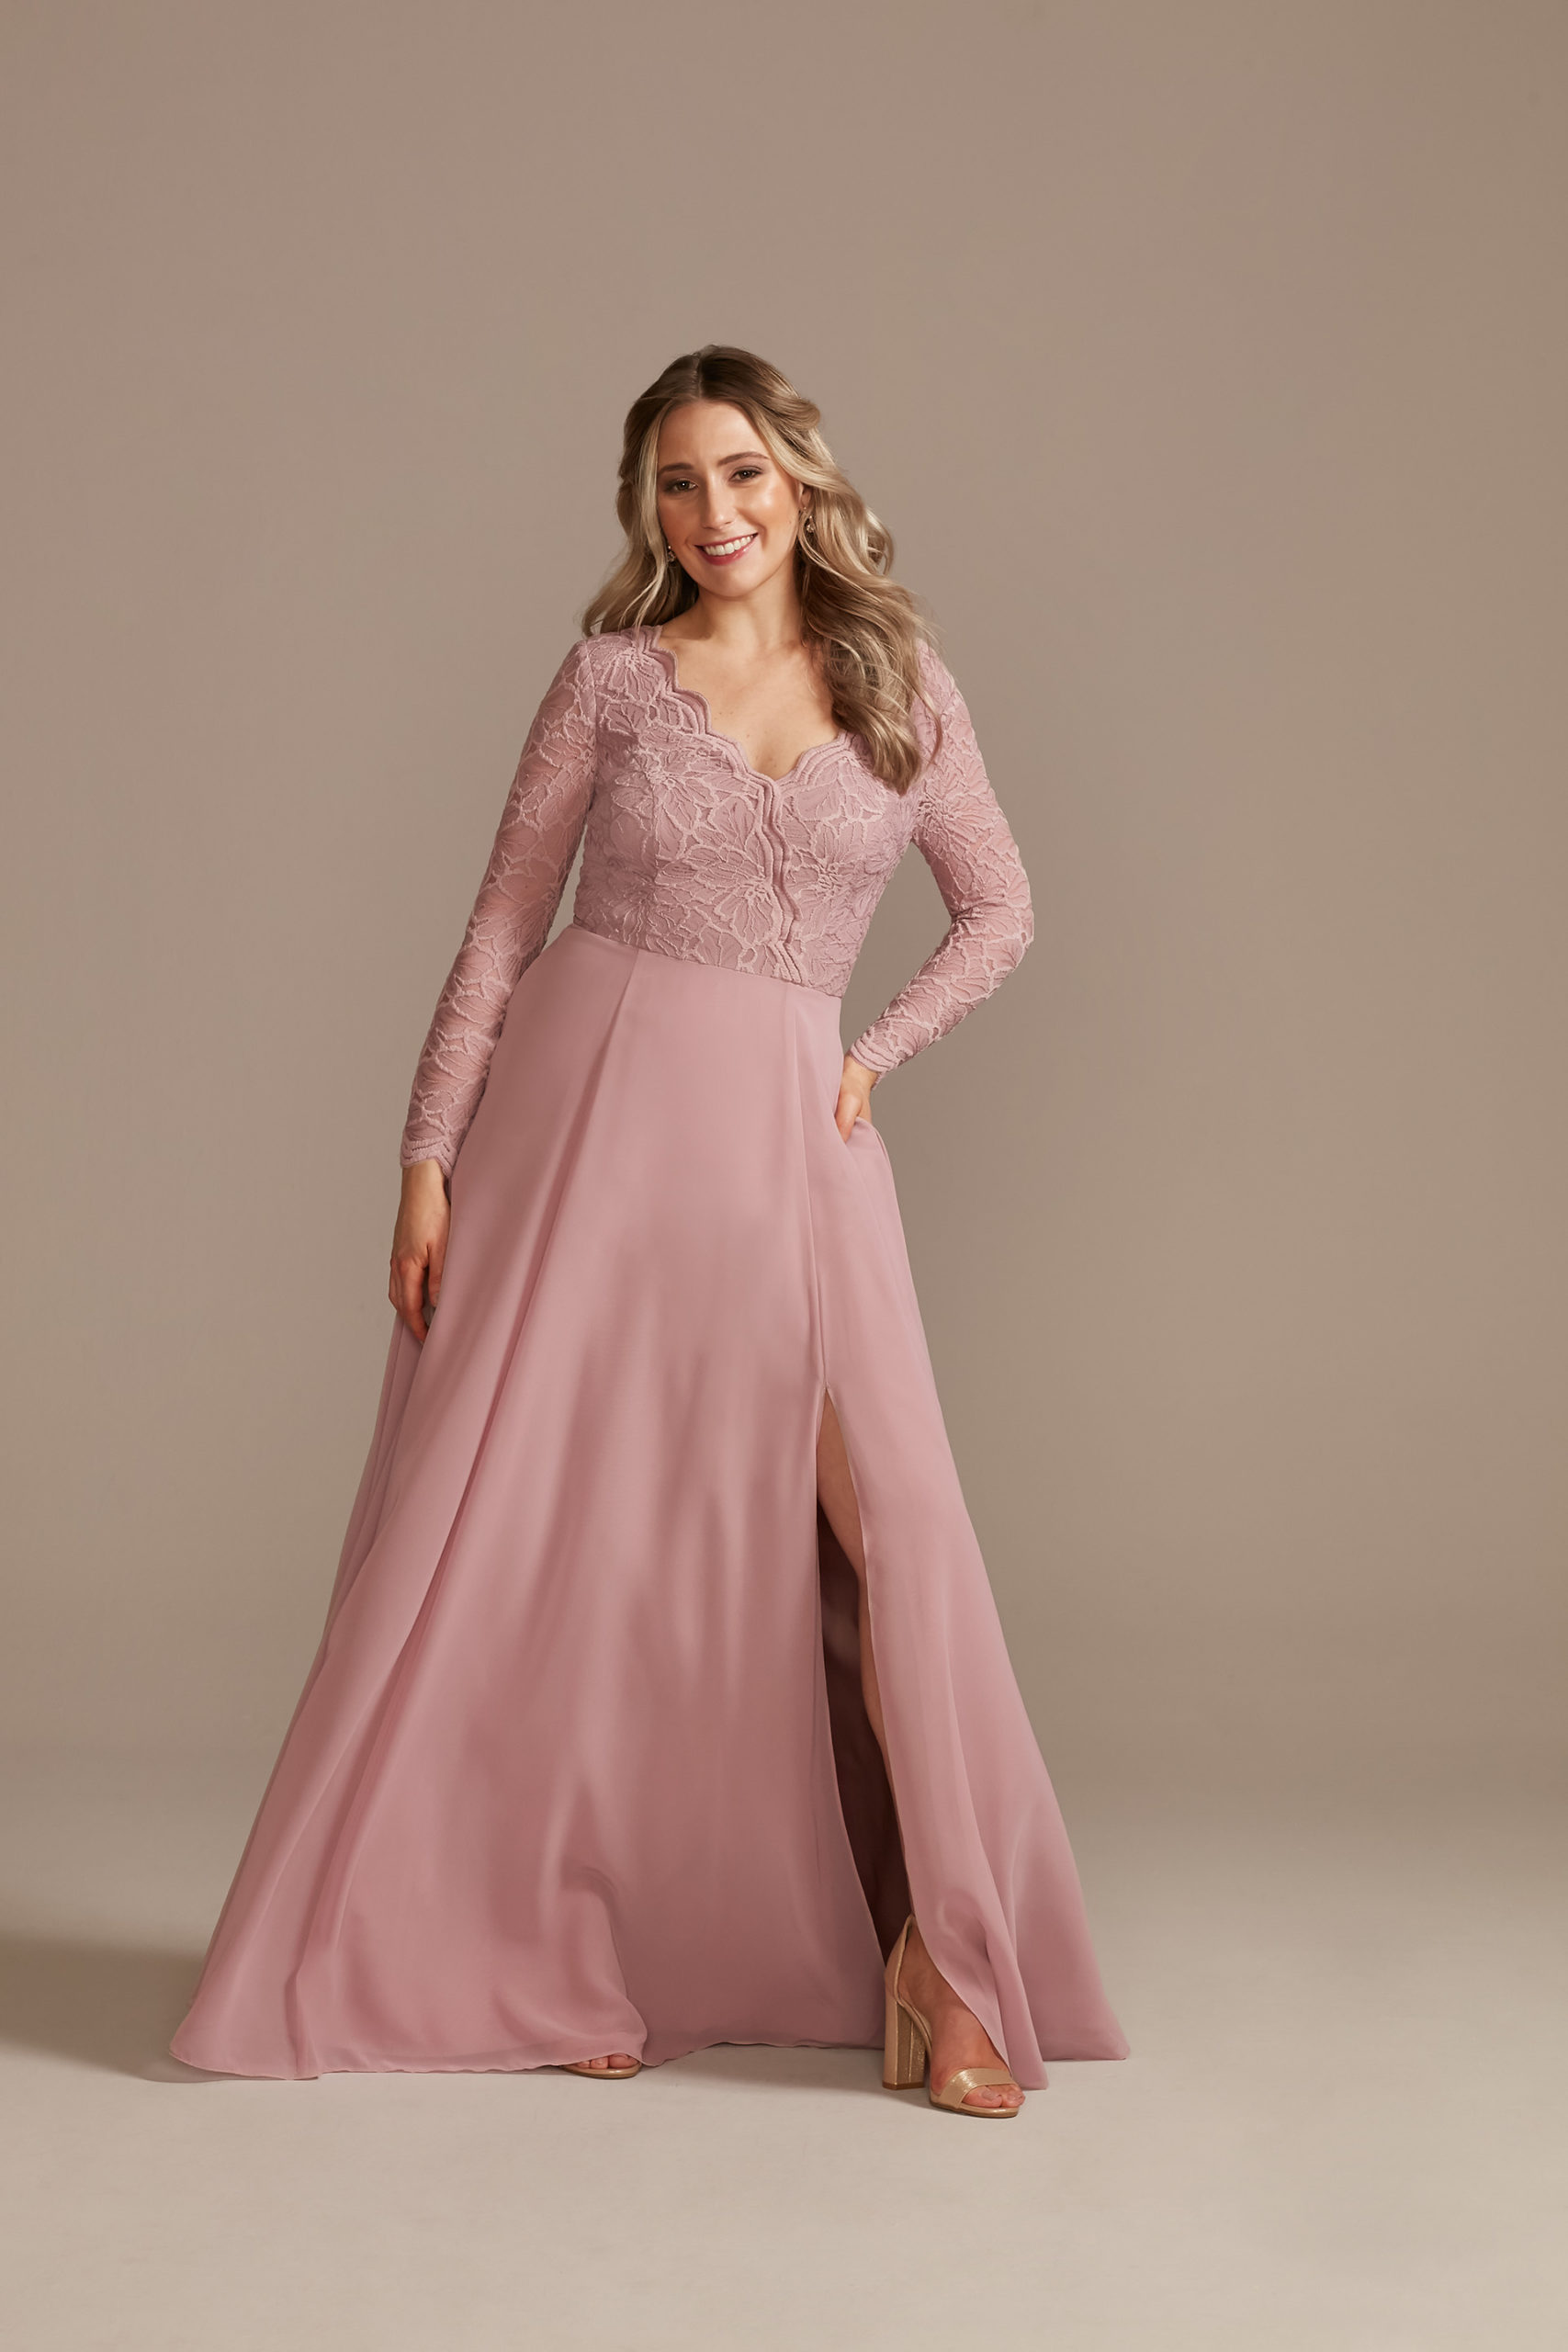 bridesmaid dress with lace long sleeves